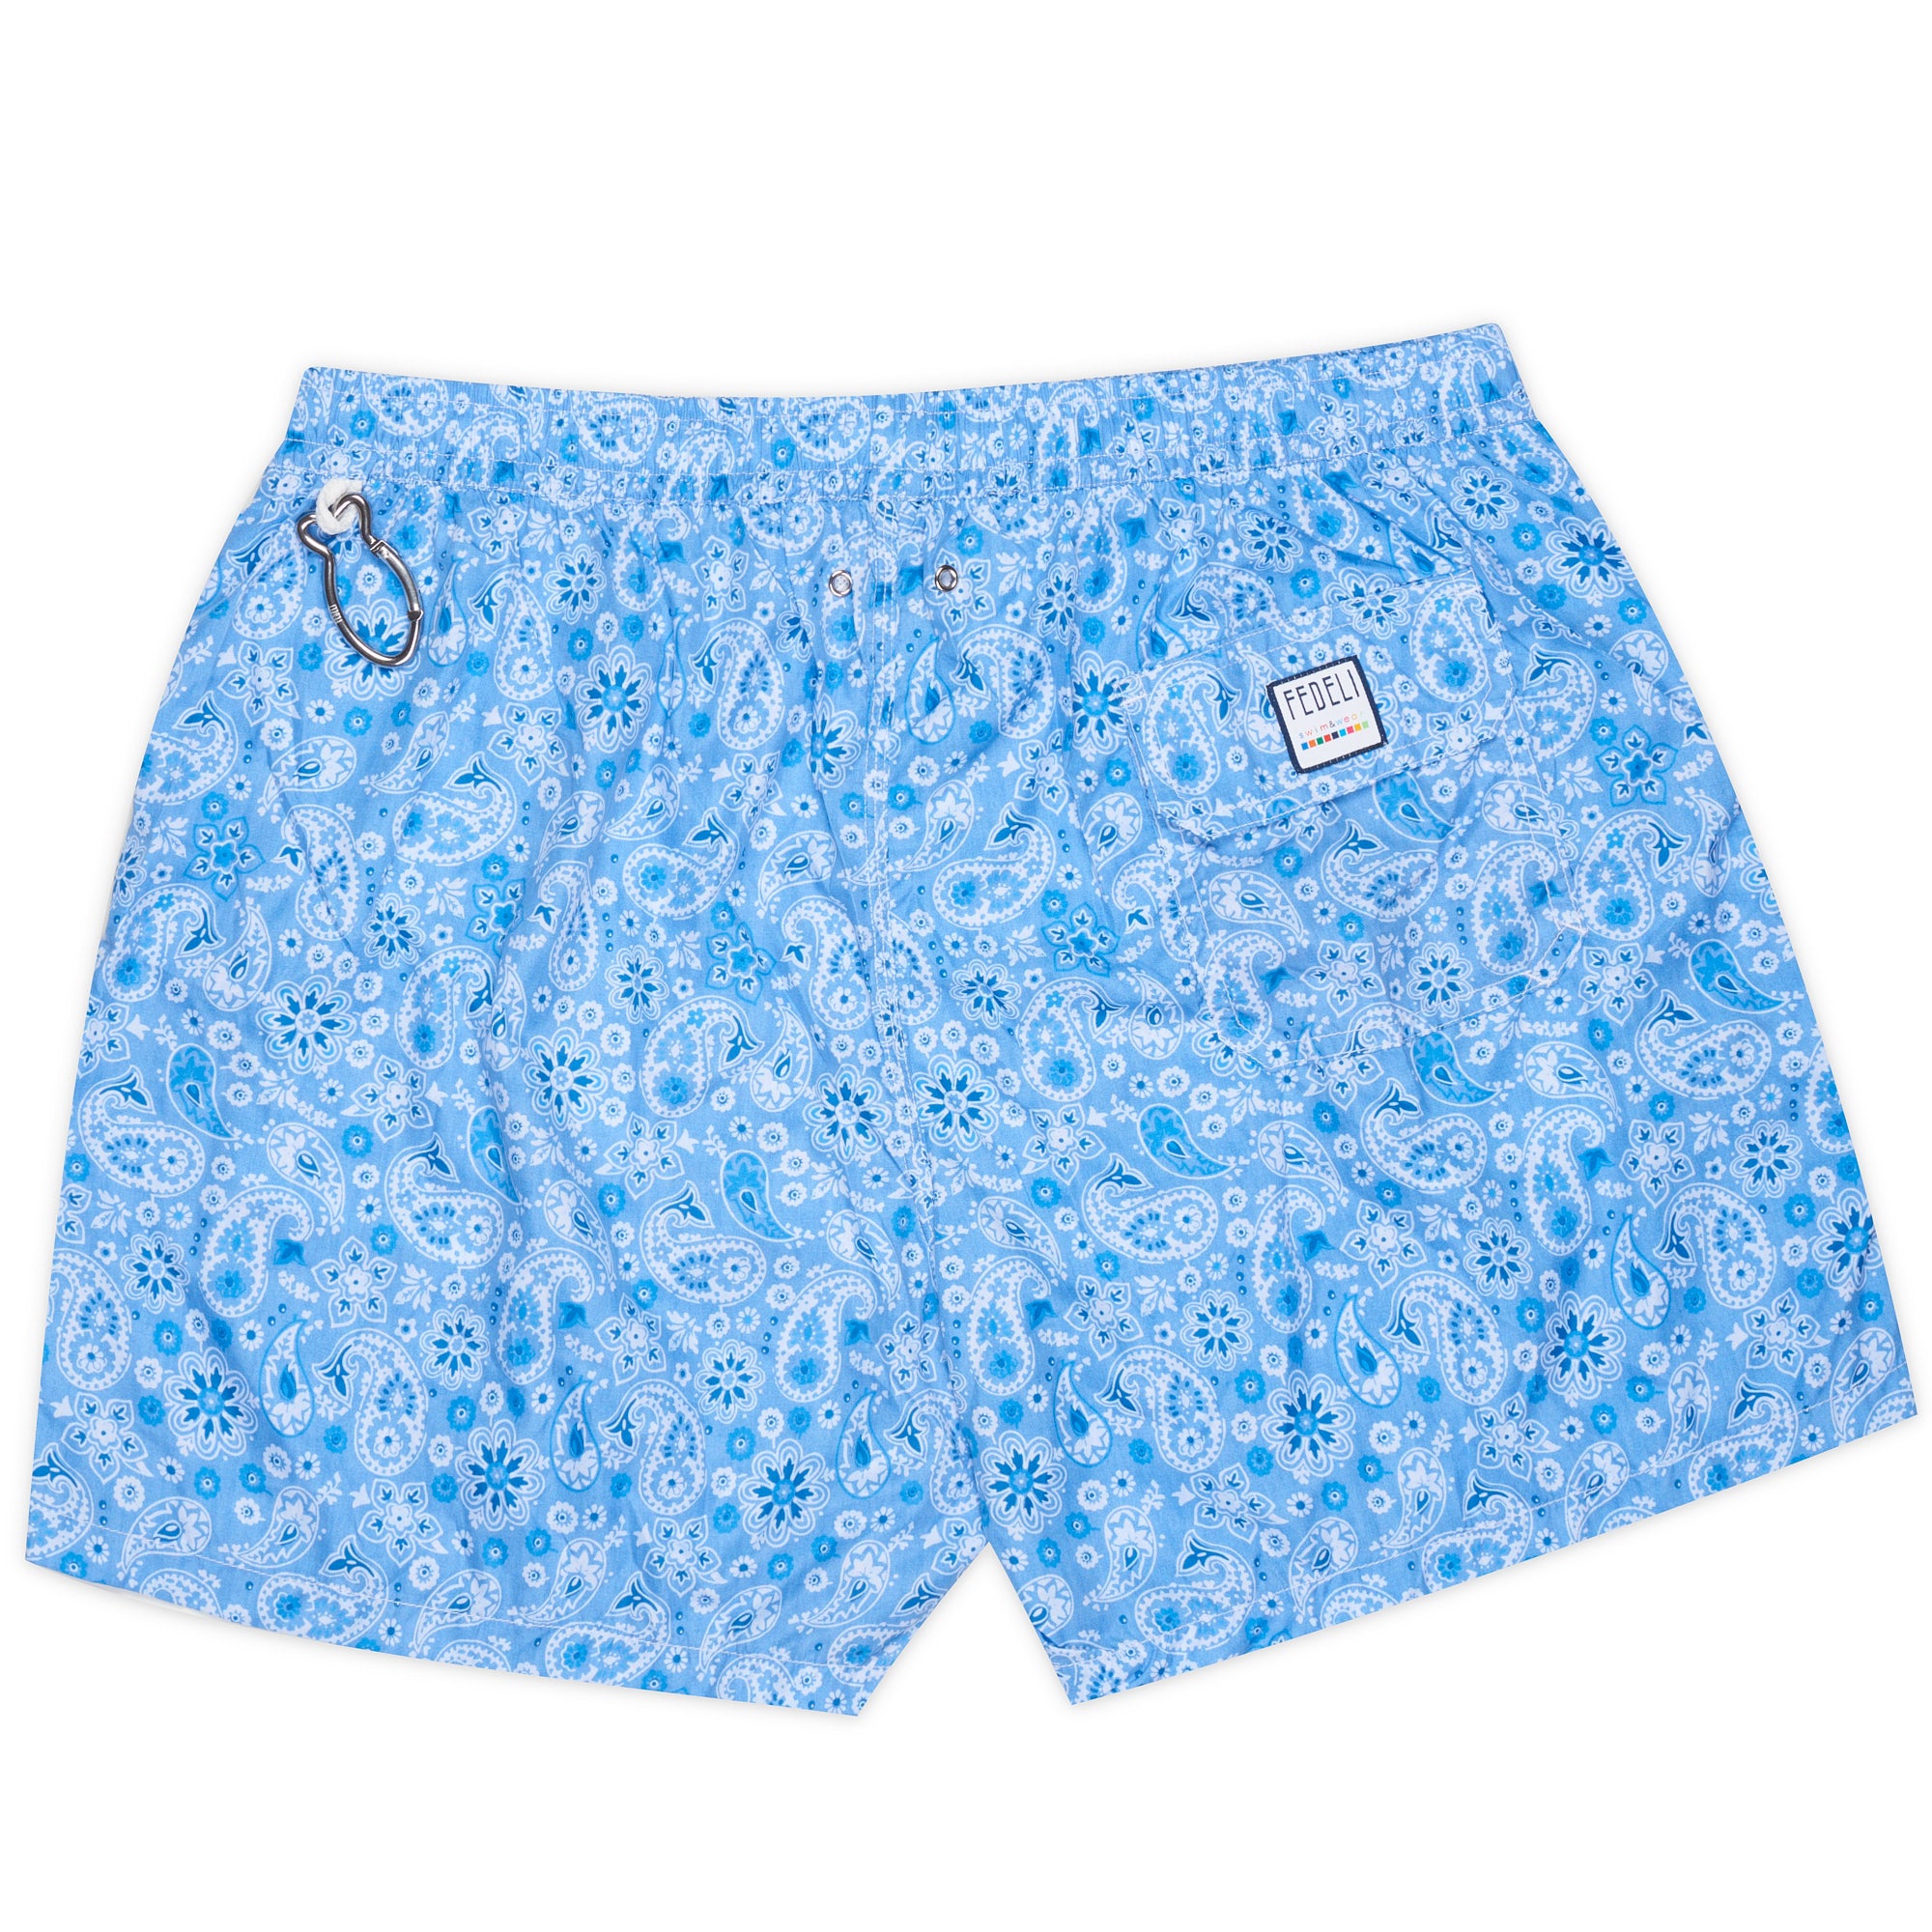 FEDELI Blue Floral Paisley Printed Madeira Airstop Swim Shorts Trunks NEW 3XL FEDELI